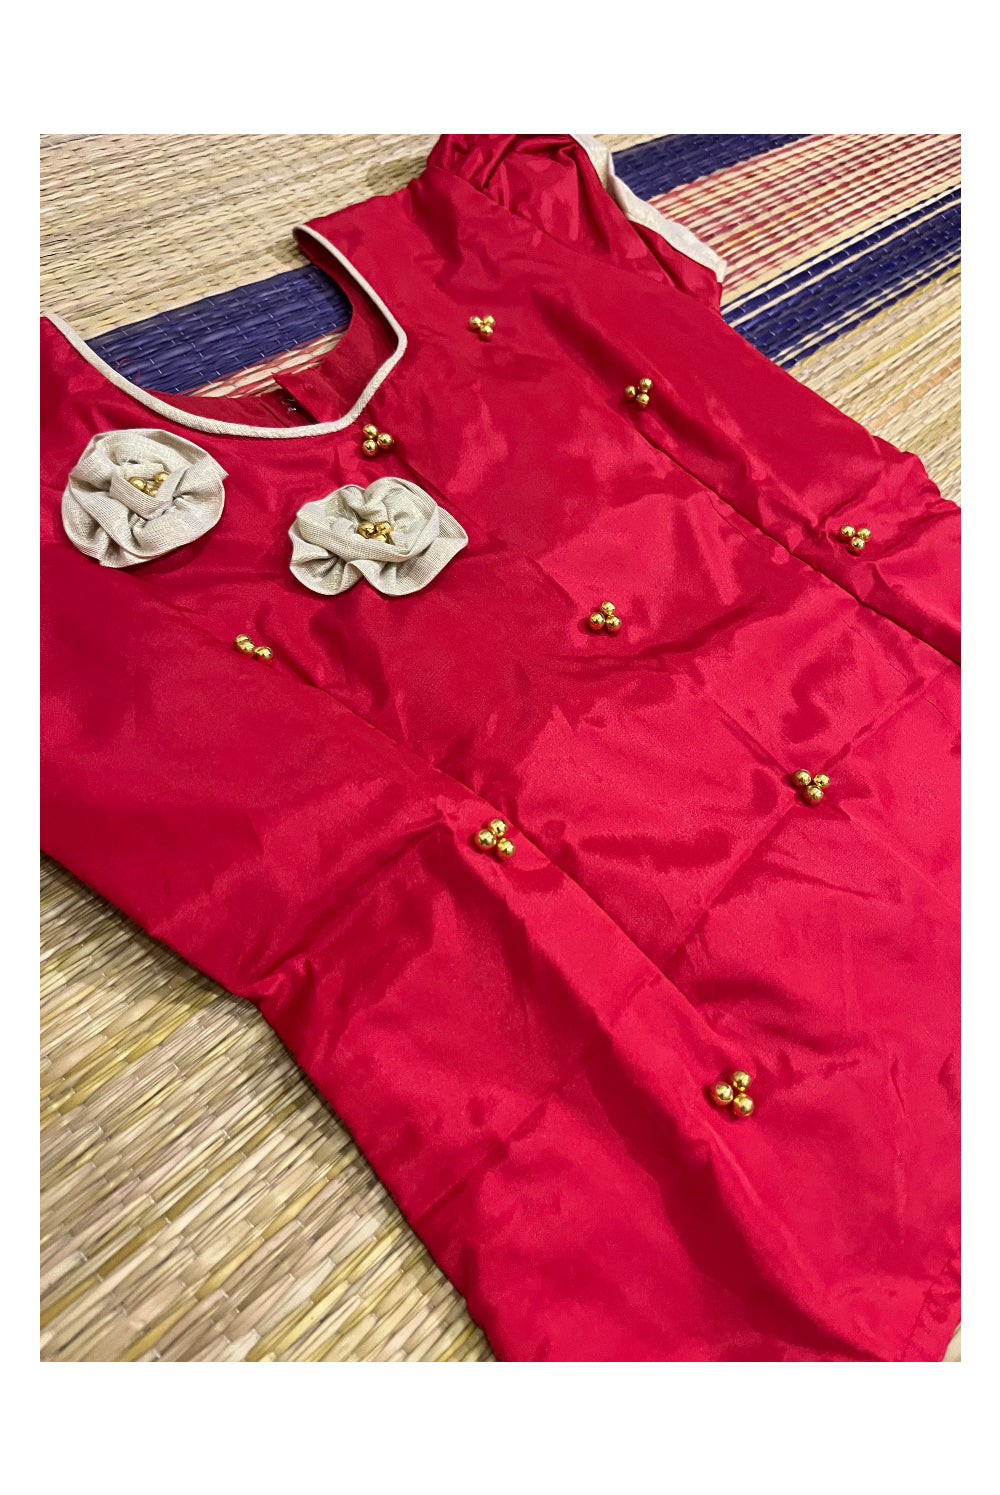 Southloom Kerala Red Pavada Blouse with Bead Work for Kids (Age 1 - 10)